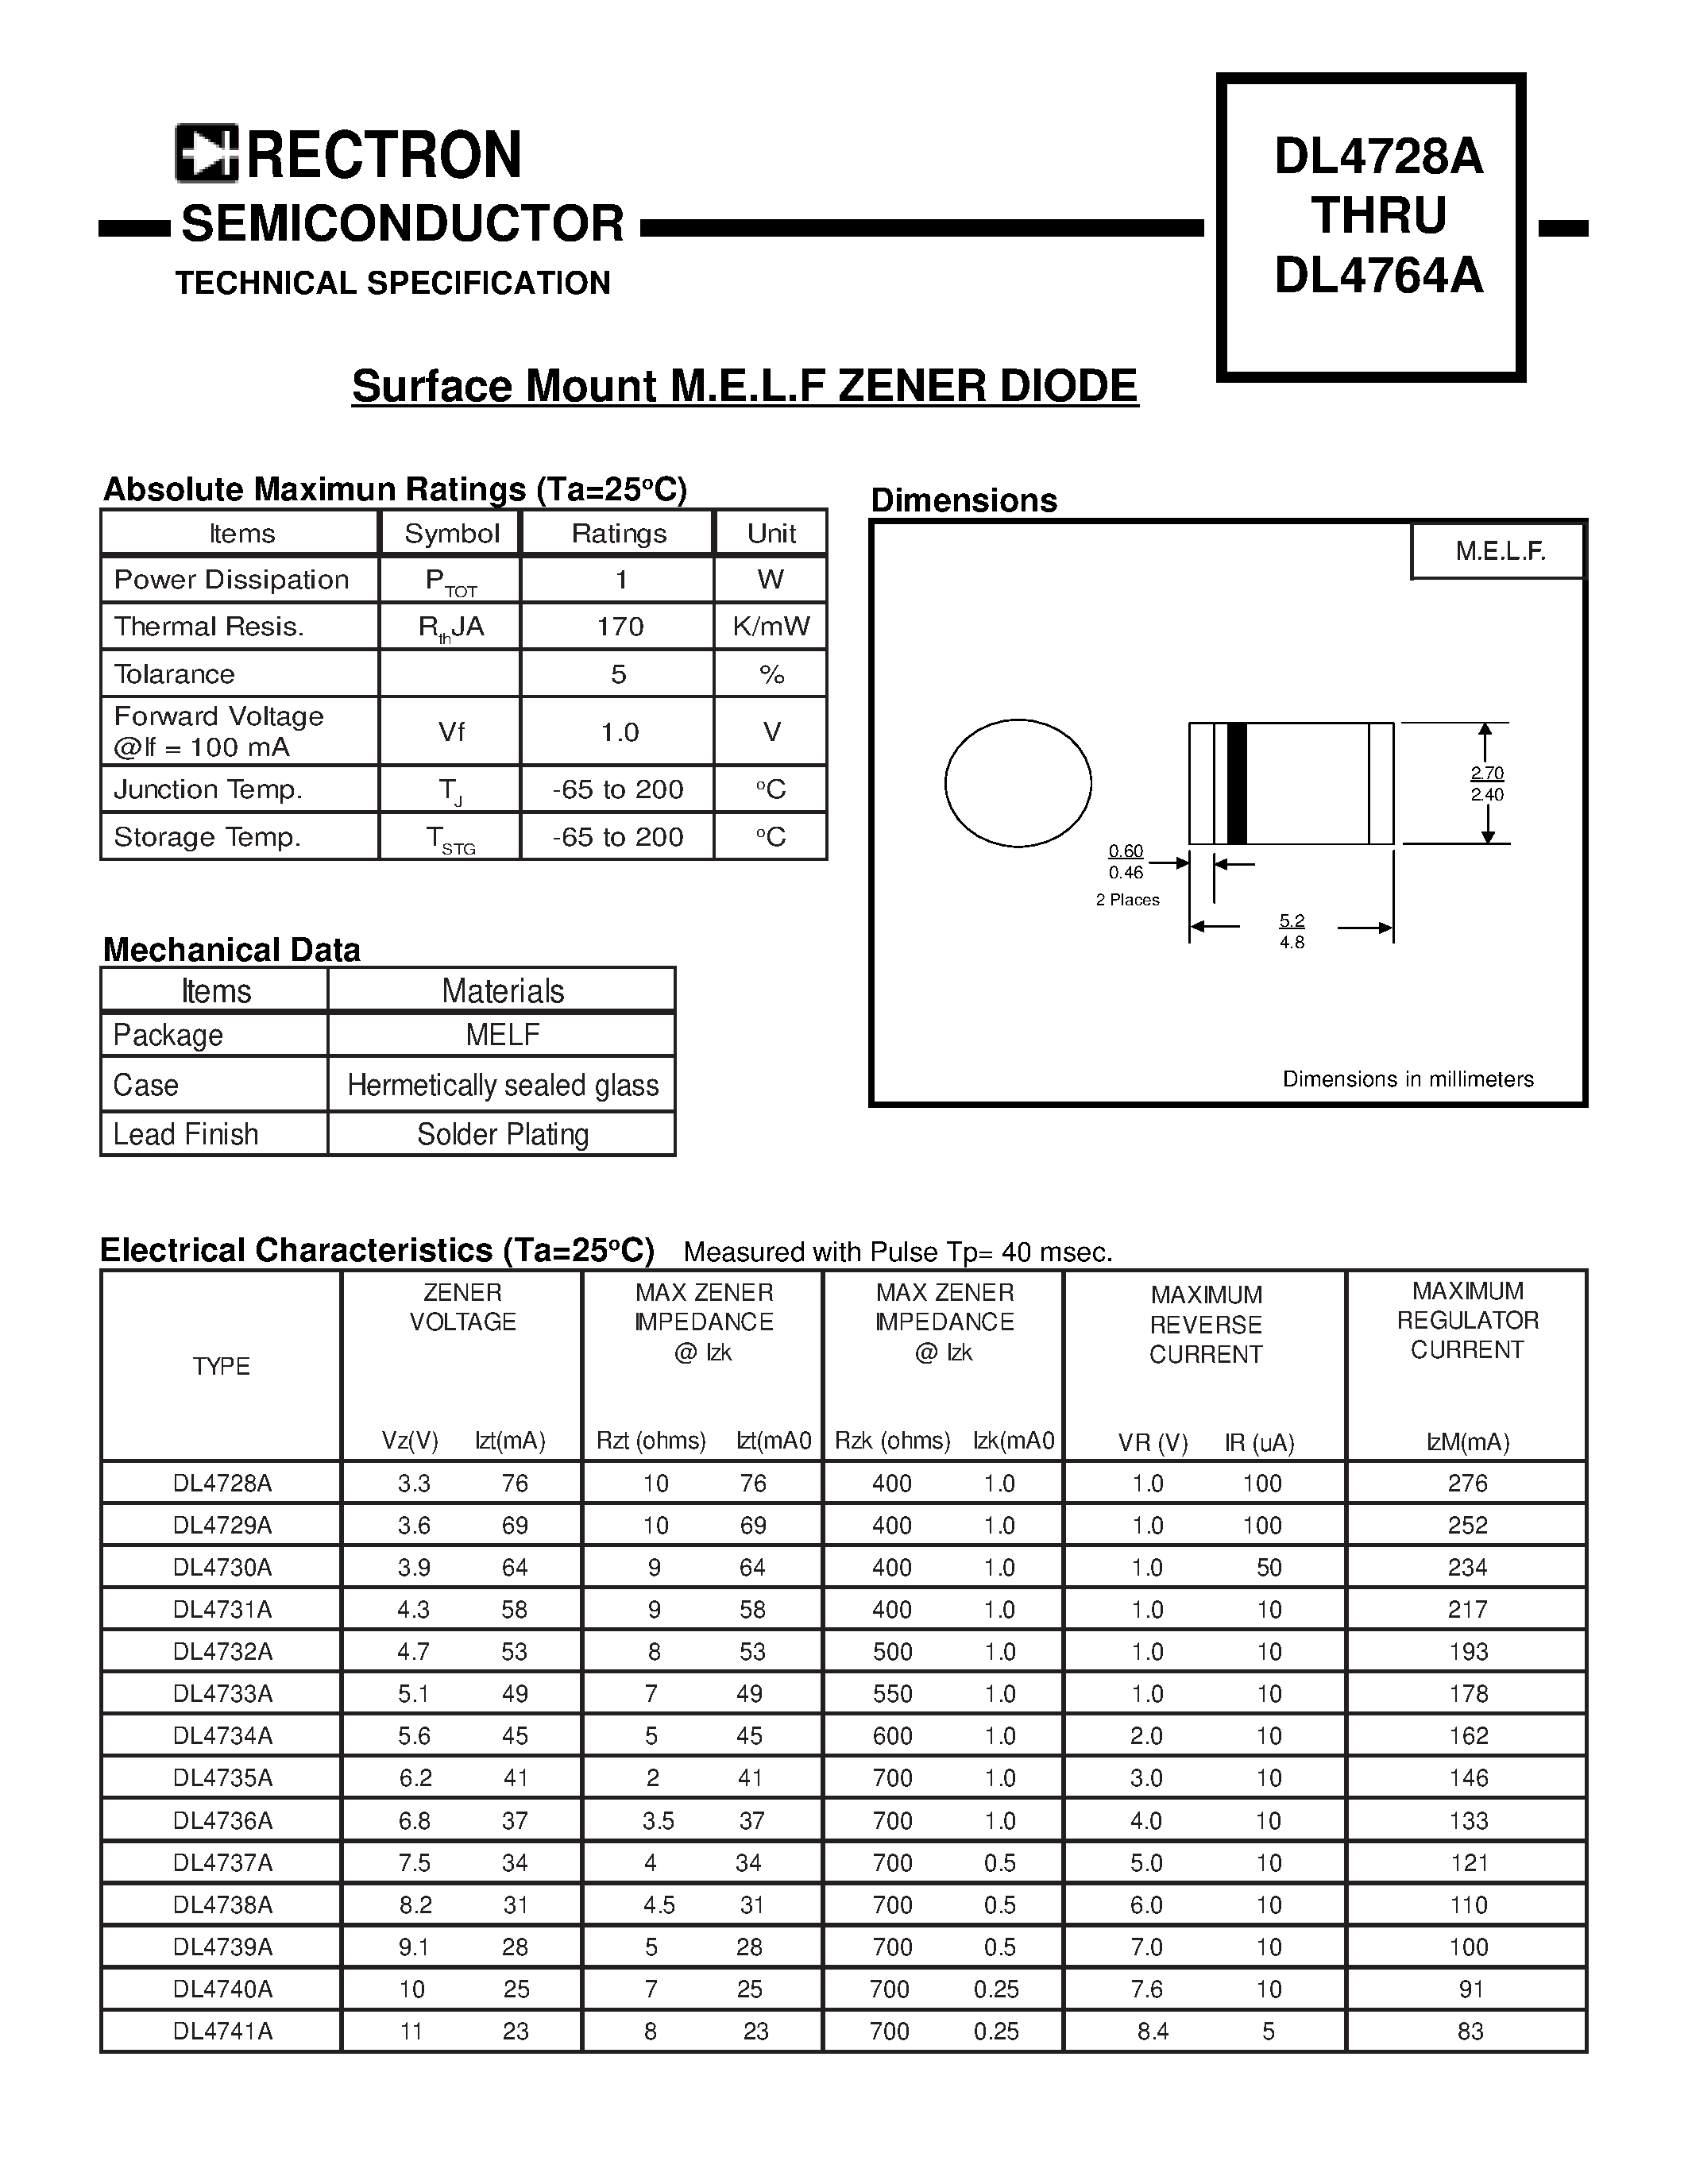 Datasheet DL4732A - Surface Mount M.E.L.F ZENER DIODE page 1